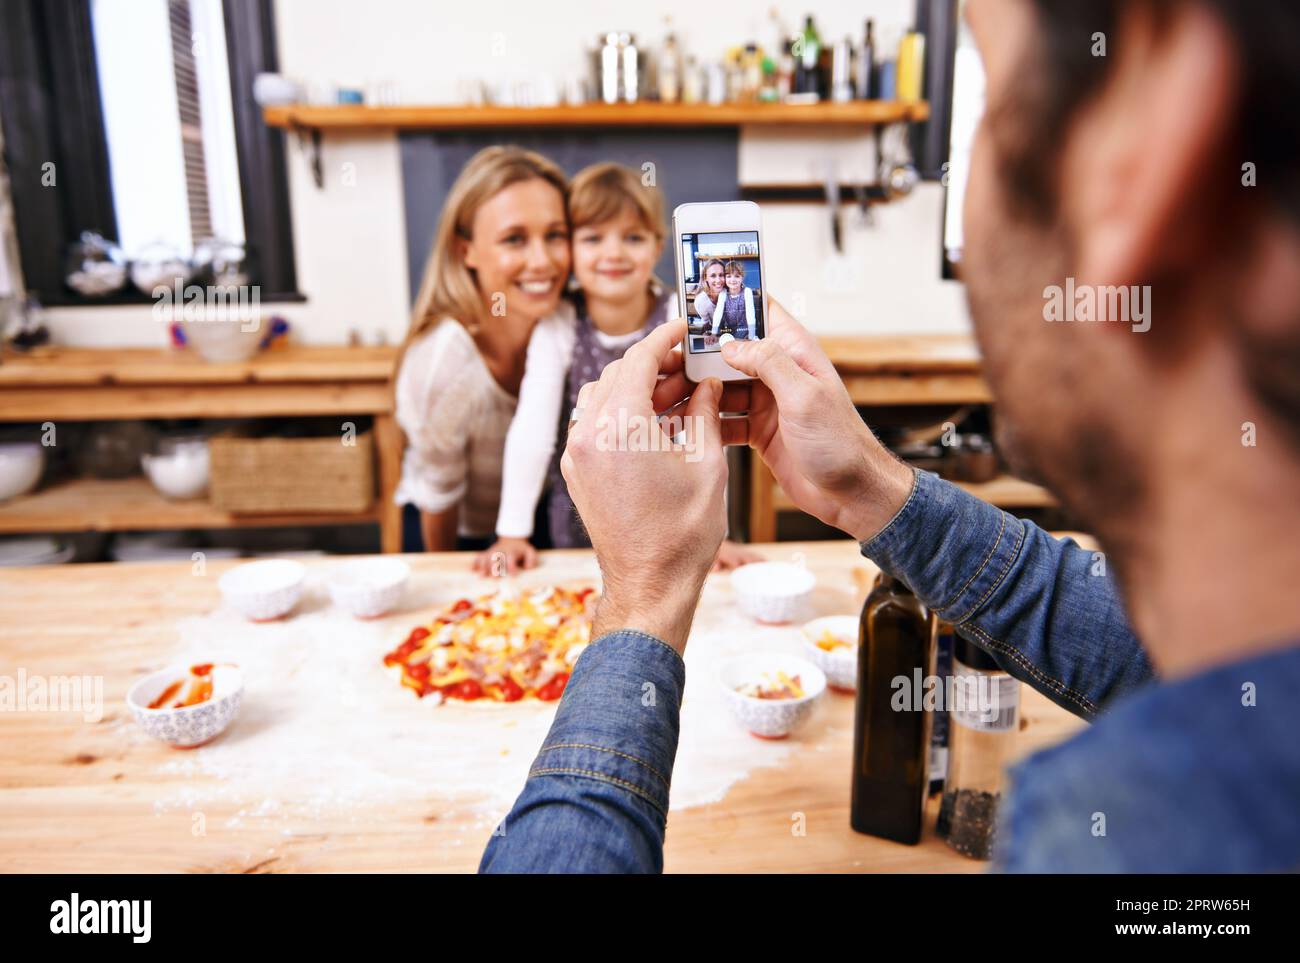 Say Pizza. A dad taking a photo of his family making homemade pizza. Stock Photo